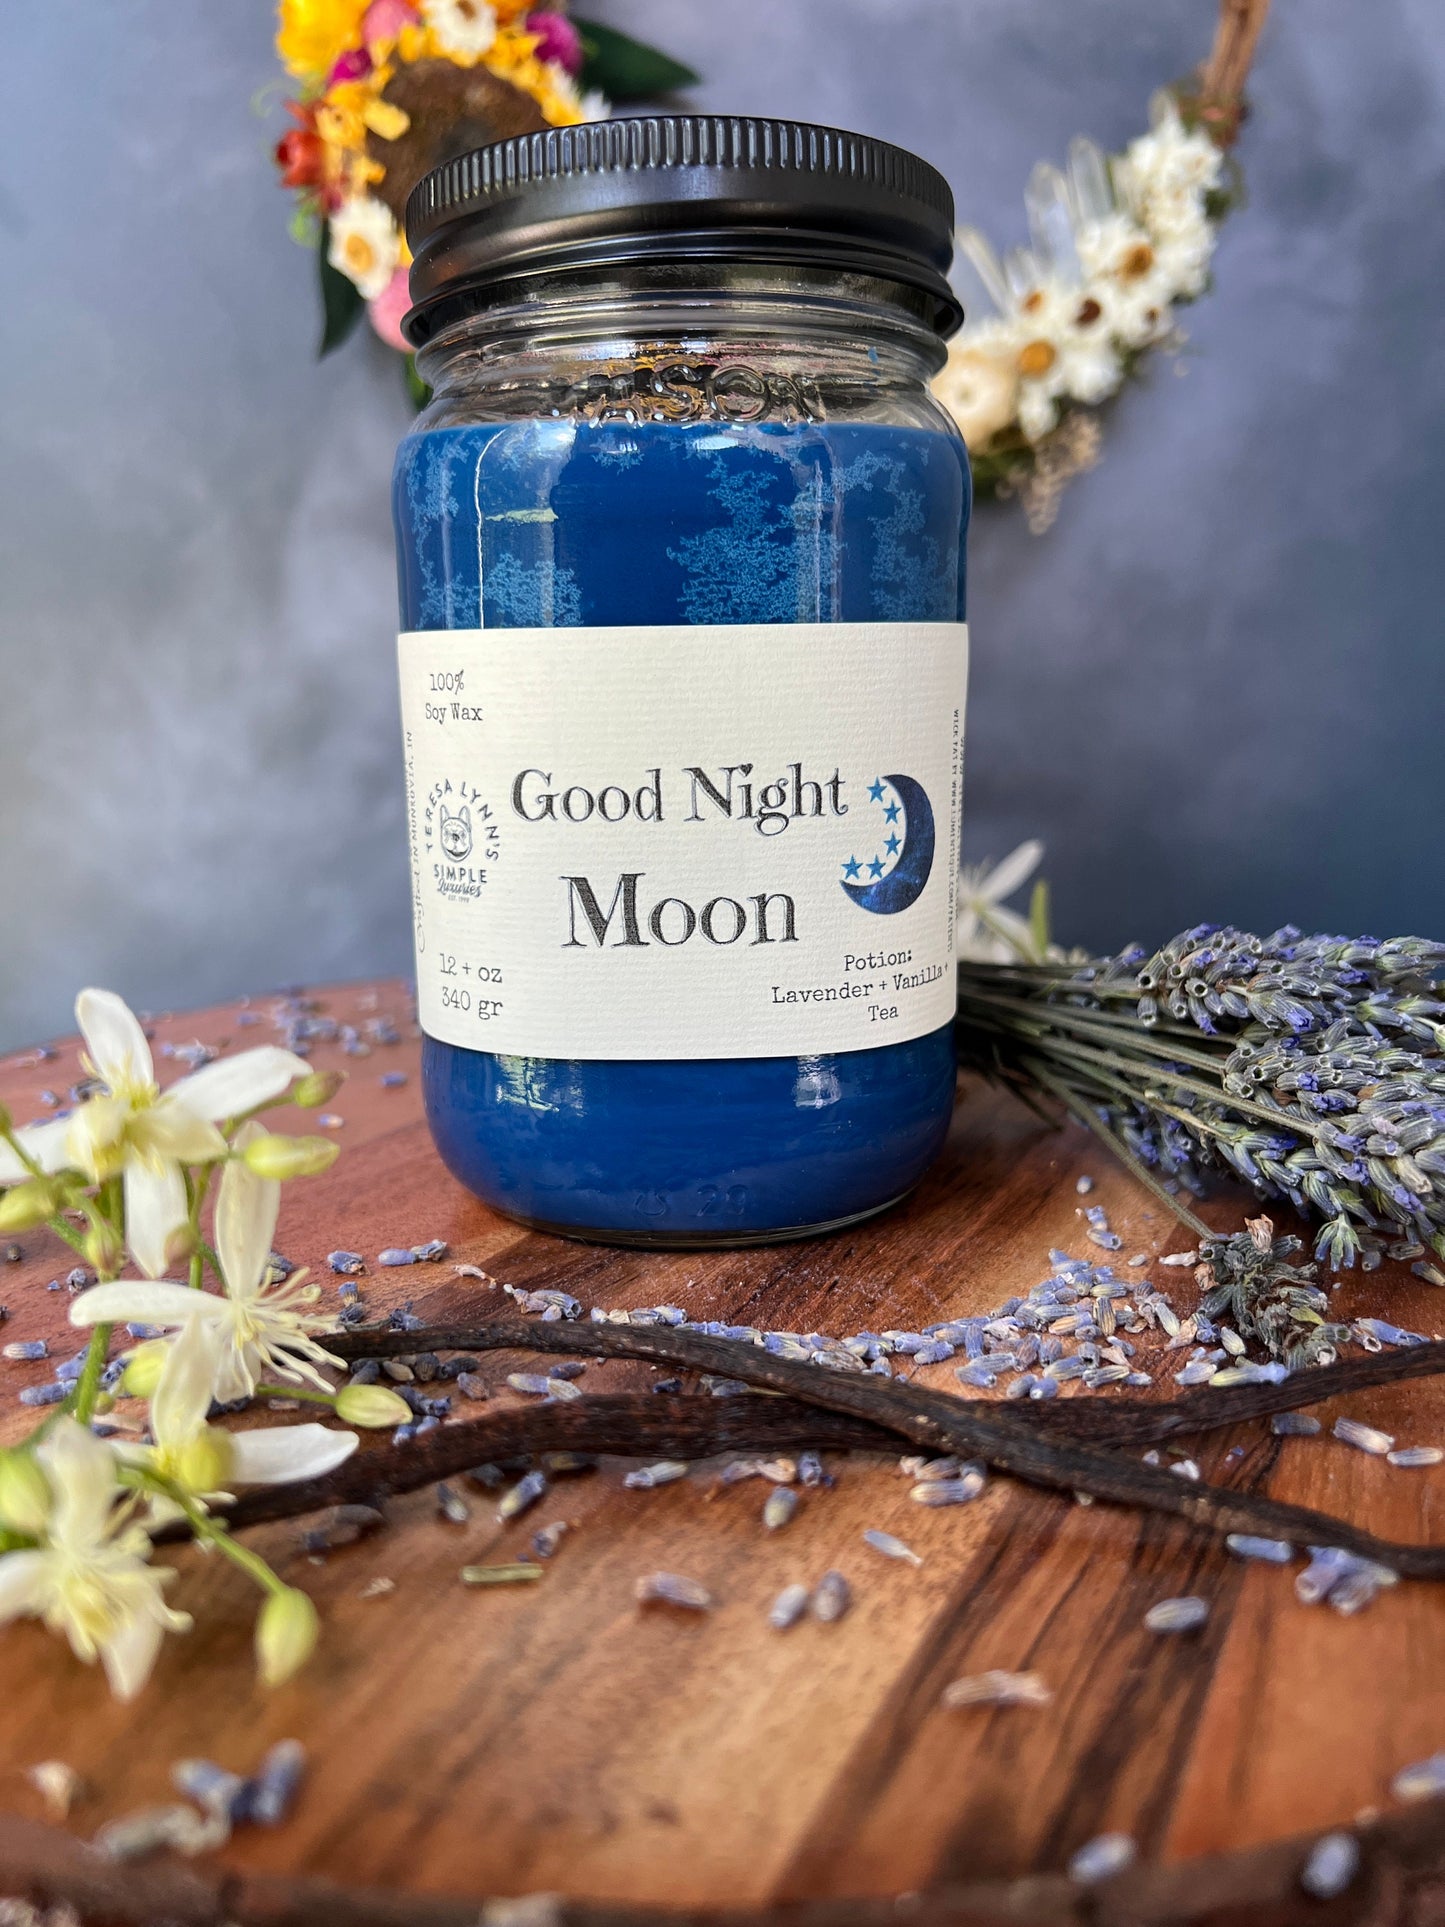 Good Night Moon, Wooden wick soy candle, anxiety care, relaxation candle, hand crafted, self care, crackling, Lavender, Tuberose, sleep